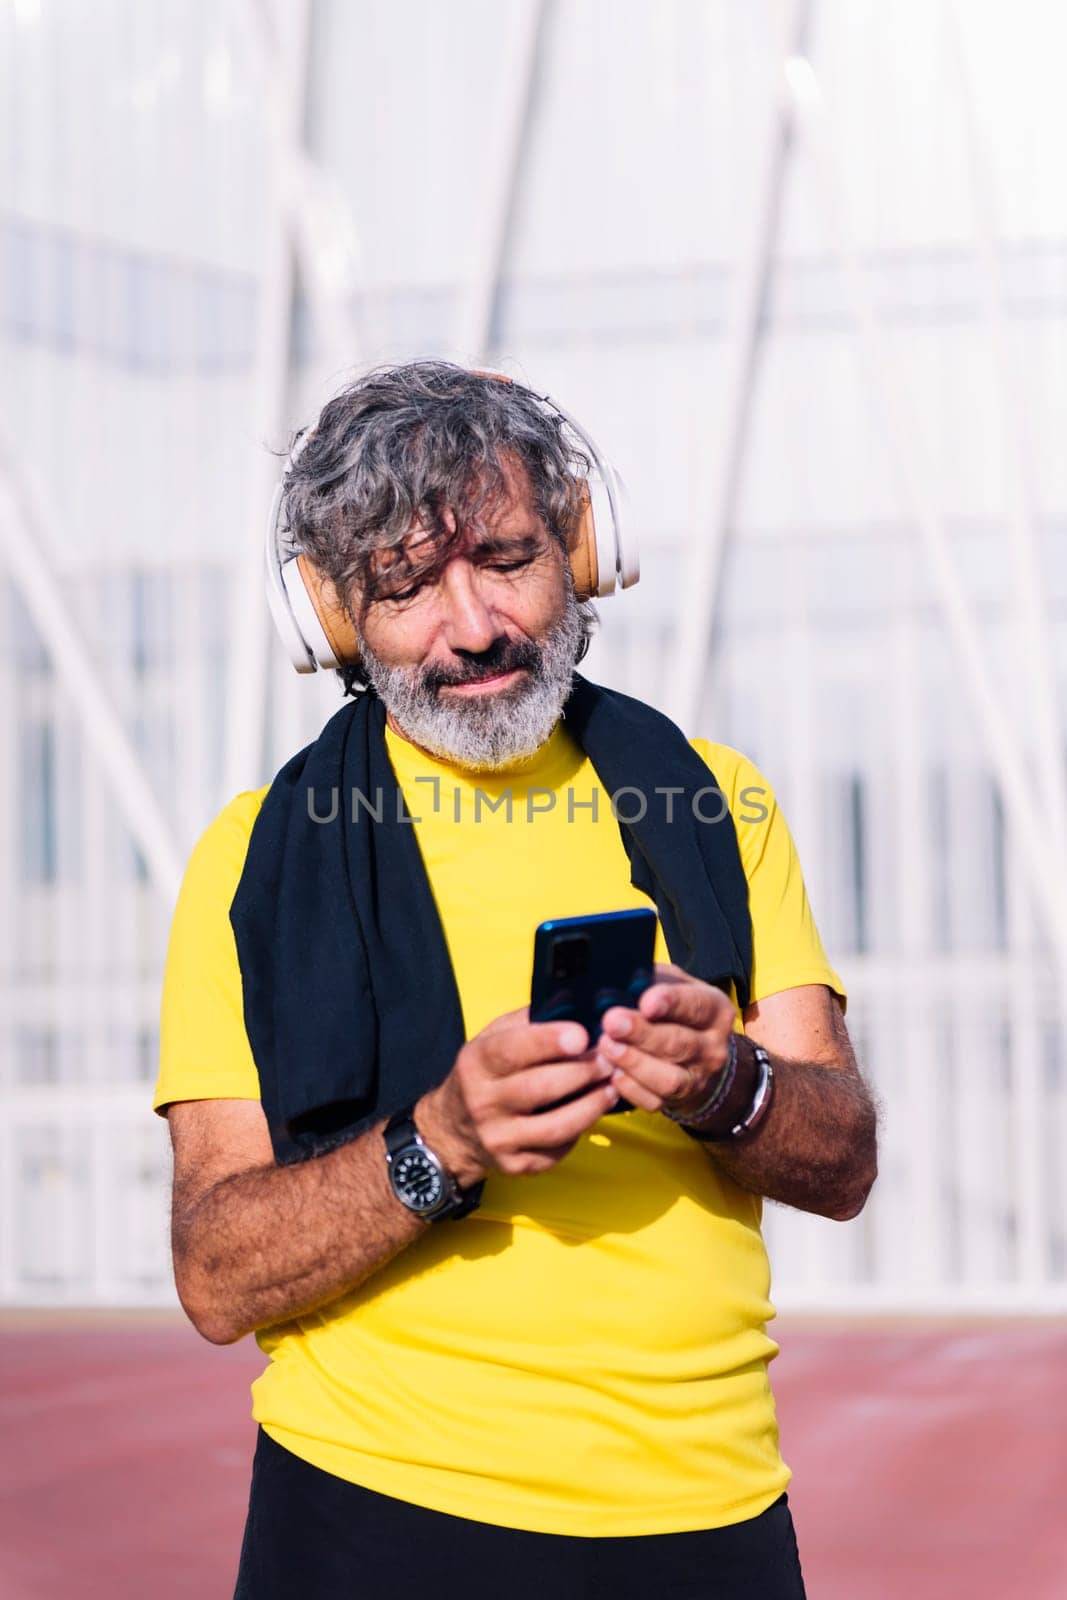 senior sports man listening to music from mobile phone with headphones, concept of active lifestyle in middle age, copy space for text